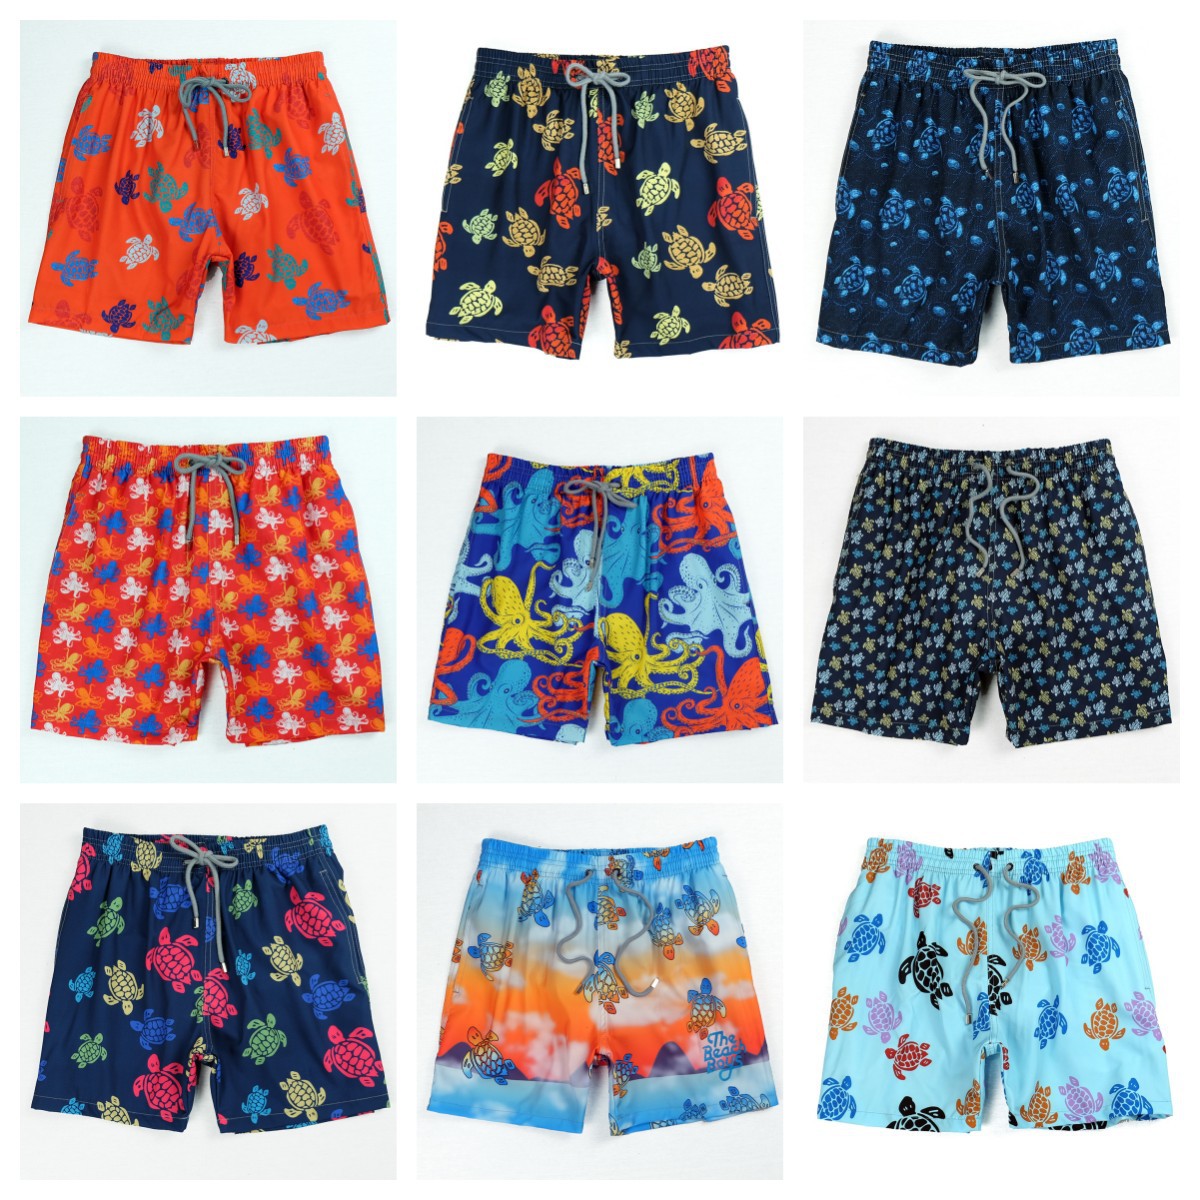 Turtle Summer Men‘s Printed Boardshort Sand Quick-Drying Beach Pants Lining Europe and America Cross Border Supply